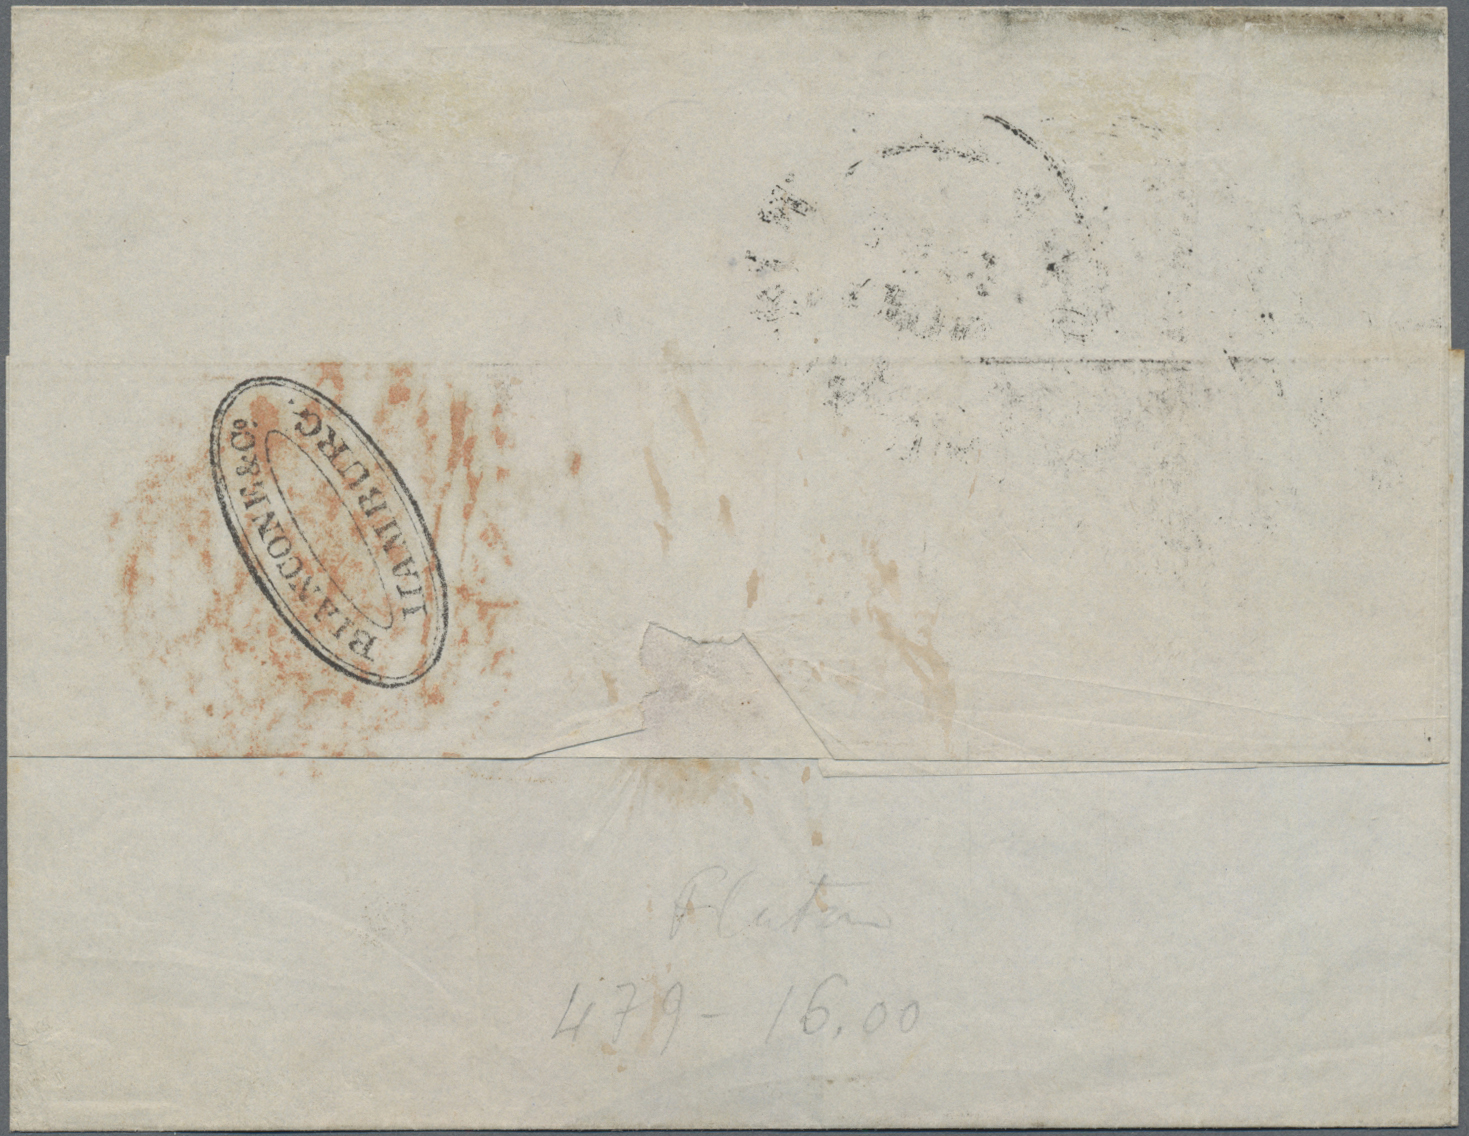 Lot 03759 - Brasilien - Vorphila / Stampless Covers  -  Auktionshaus Christoph Gärtner GmbH & Co. KG 55th AUCTION - Day 2